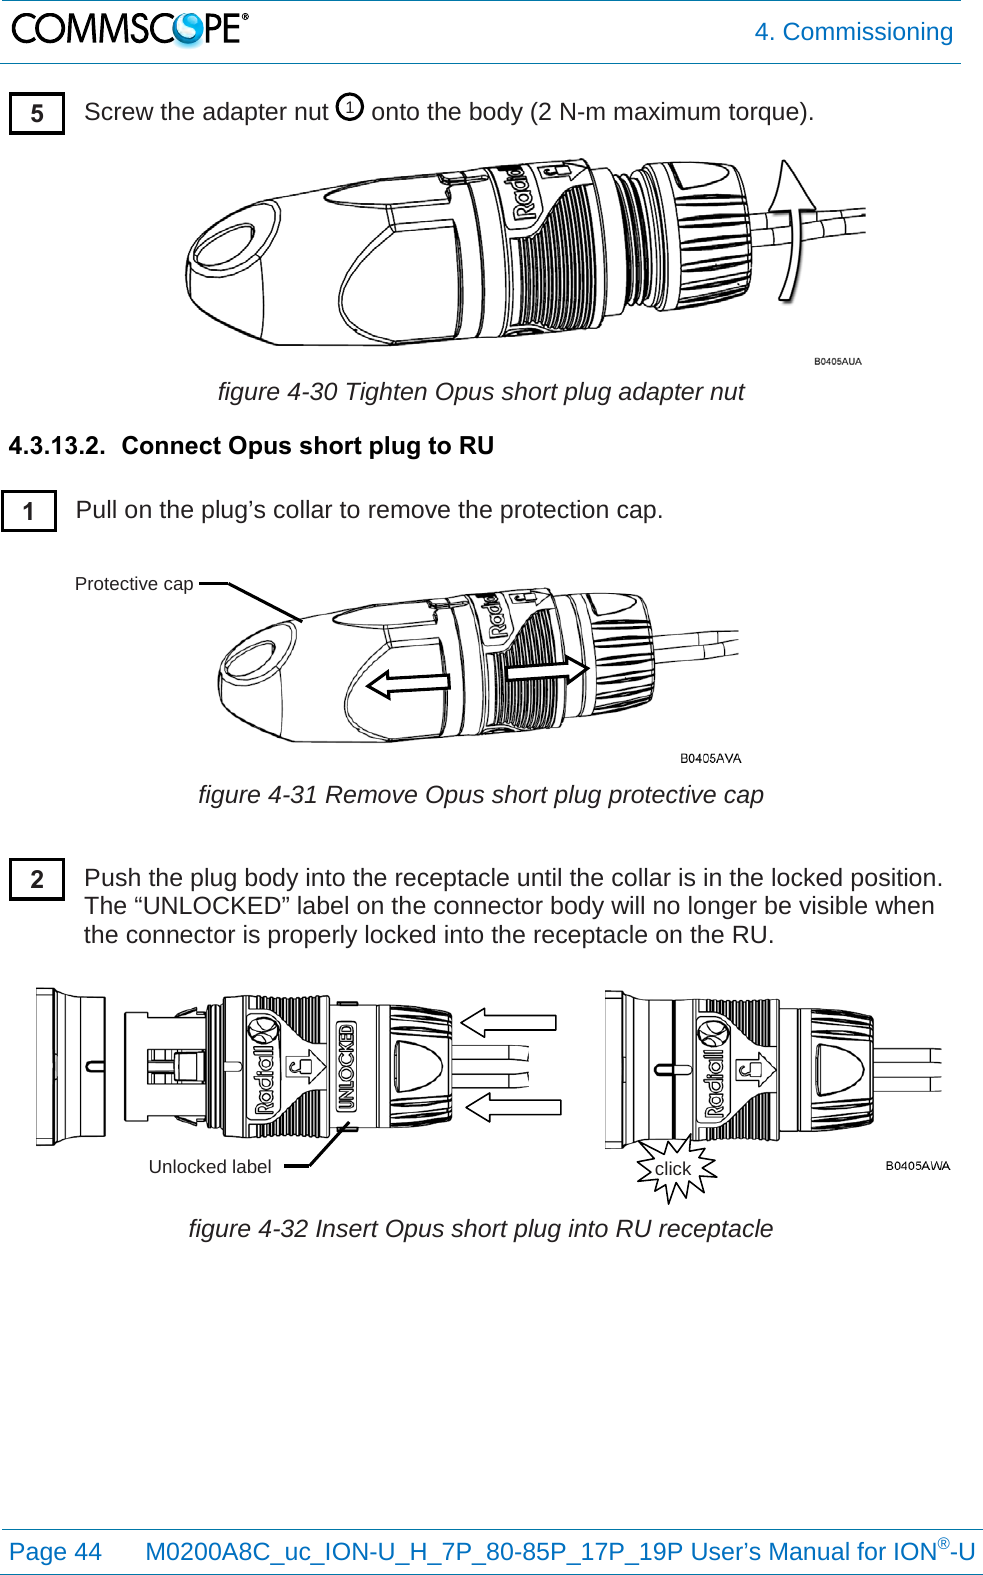  4. Commissioning  Page 44 M0200A8C_uc_ION-U_H_7P_80-85P_17P_19P User’s Manual for ION®-U  Screw the adapter nut   onto the body (2 N-m maximum torque).  figure 4-30 Tighten Opus short plug adapter nut 4.3.13.2. Connect Opus short plug to RU  Pull on the plug’s collar to remove the protection cap.   figure 4-31 Remove Opus short plug protective cap  Push the plug body into the receptacle until the collar is in the locked position. The “UNLOCKED” label on the connector body will no longer be visible when the connector is properly locked into the receptacle on the RU.   figure 4-32 Insert Opus short plug into RU receptacle   1 5 1 Protective cap 2 click Unlocked label 